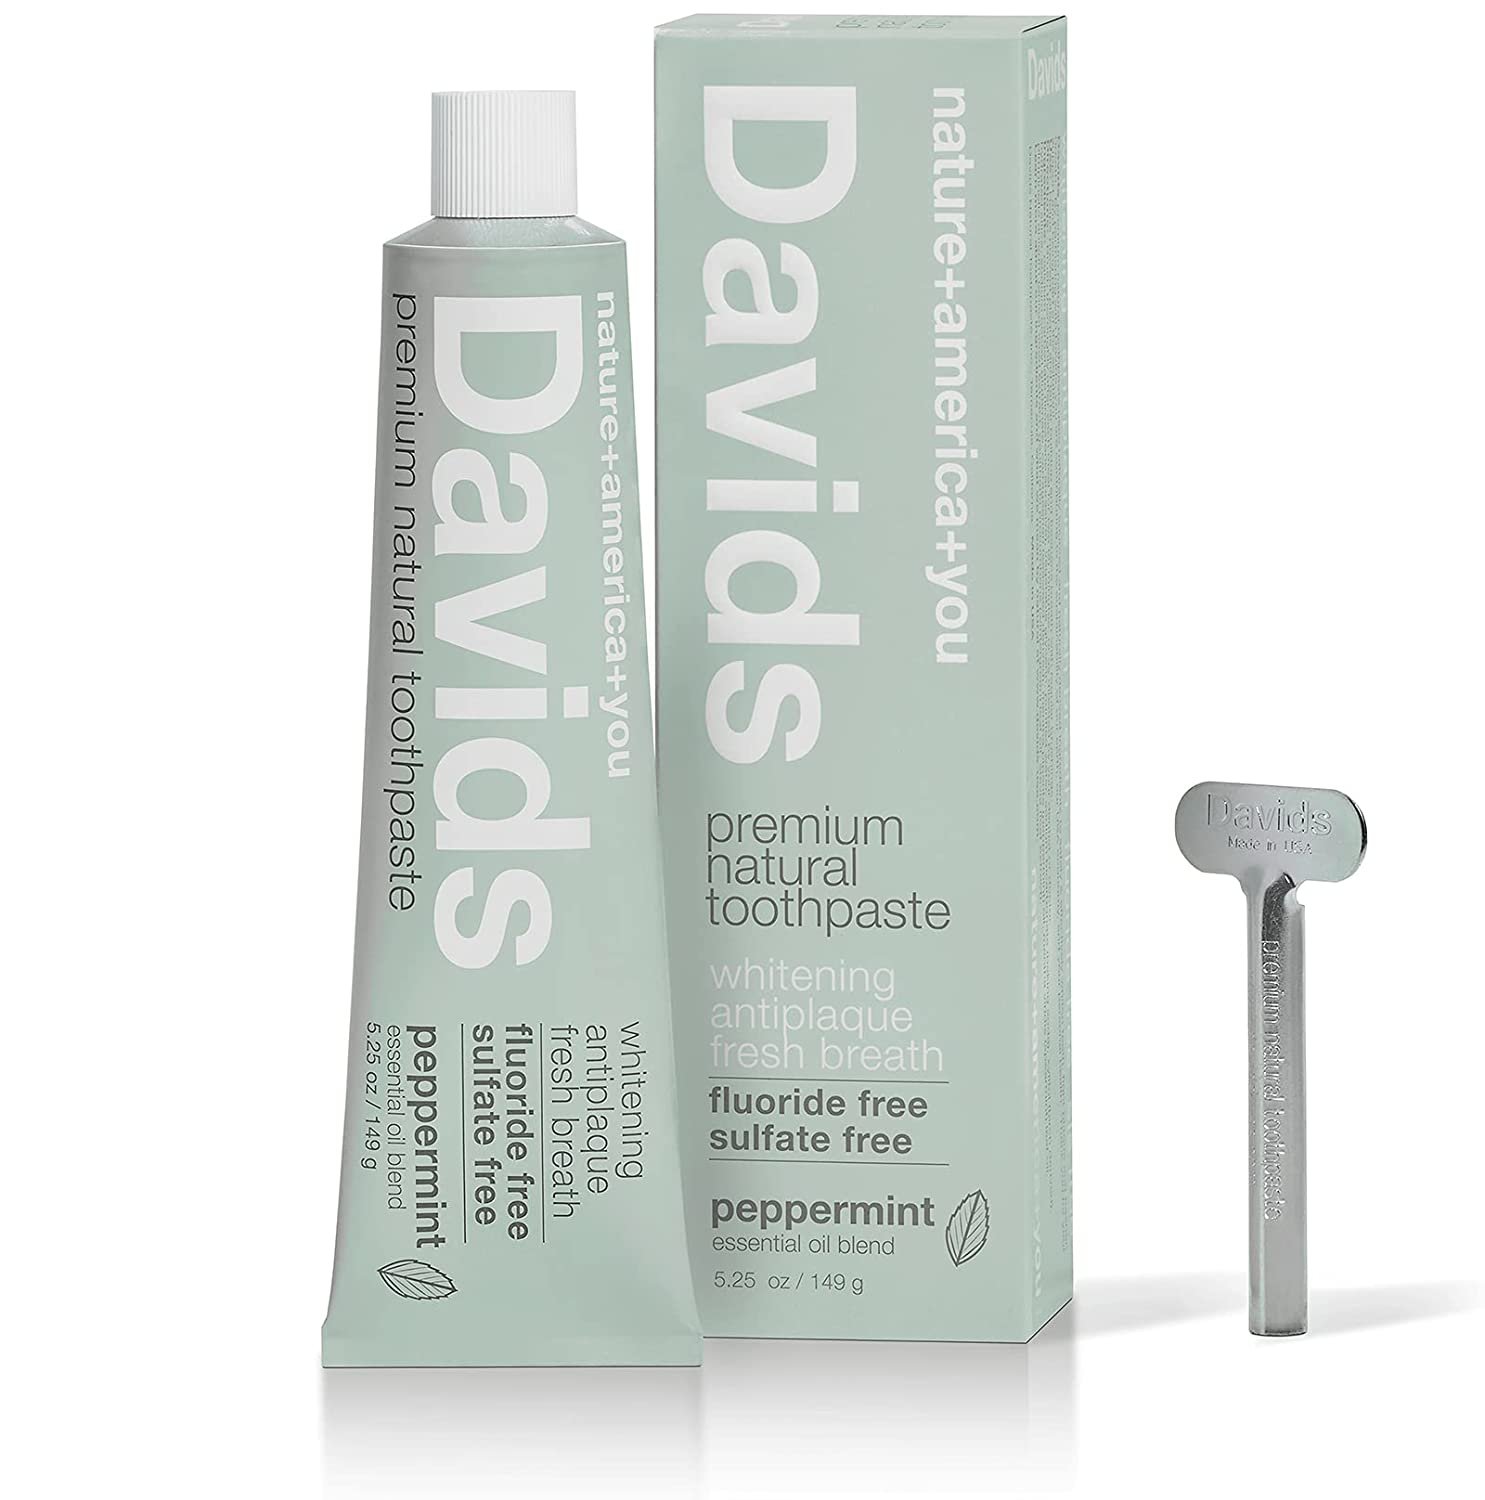 Davids Toothpaste in Metal Tube | $12